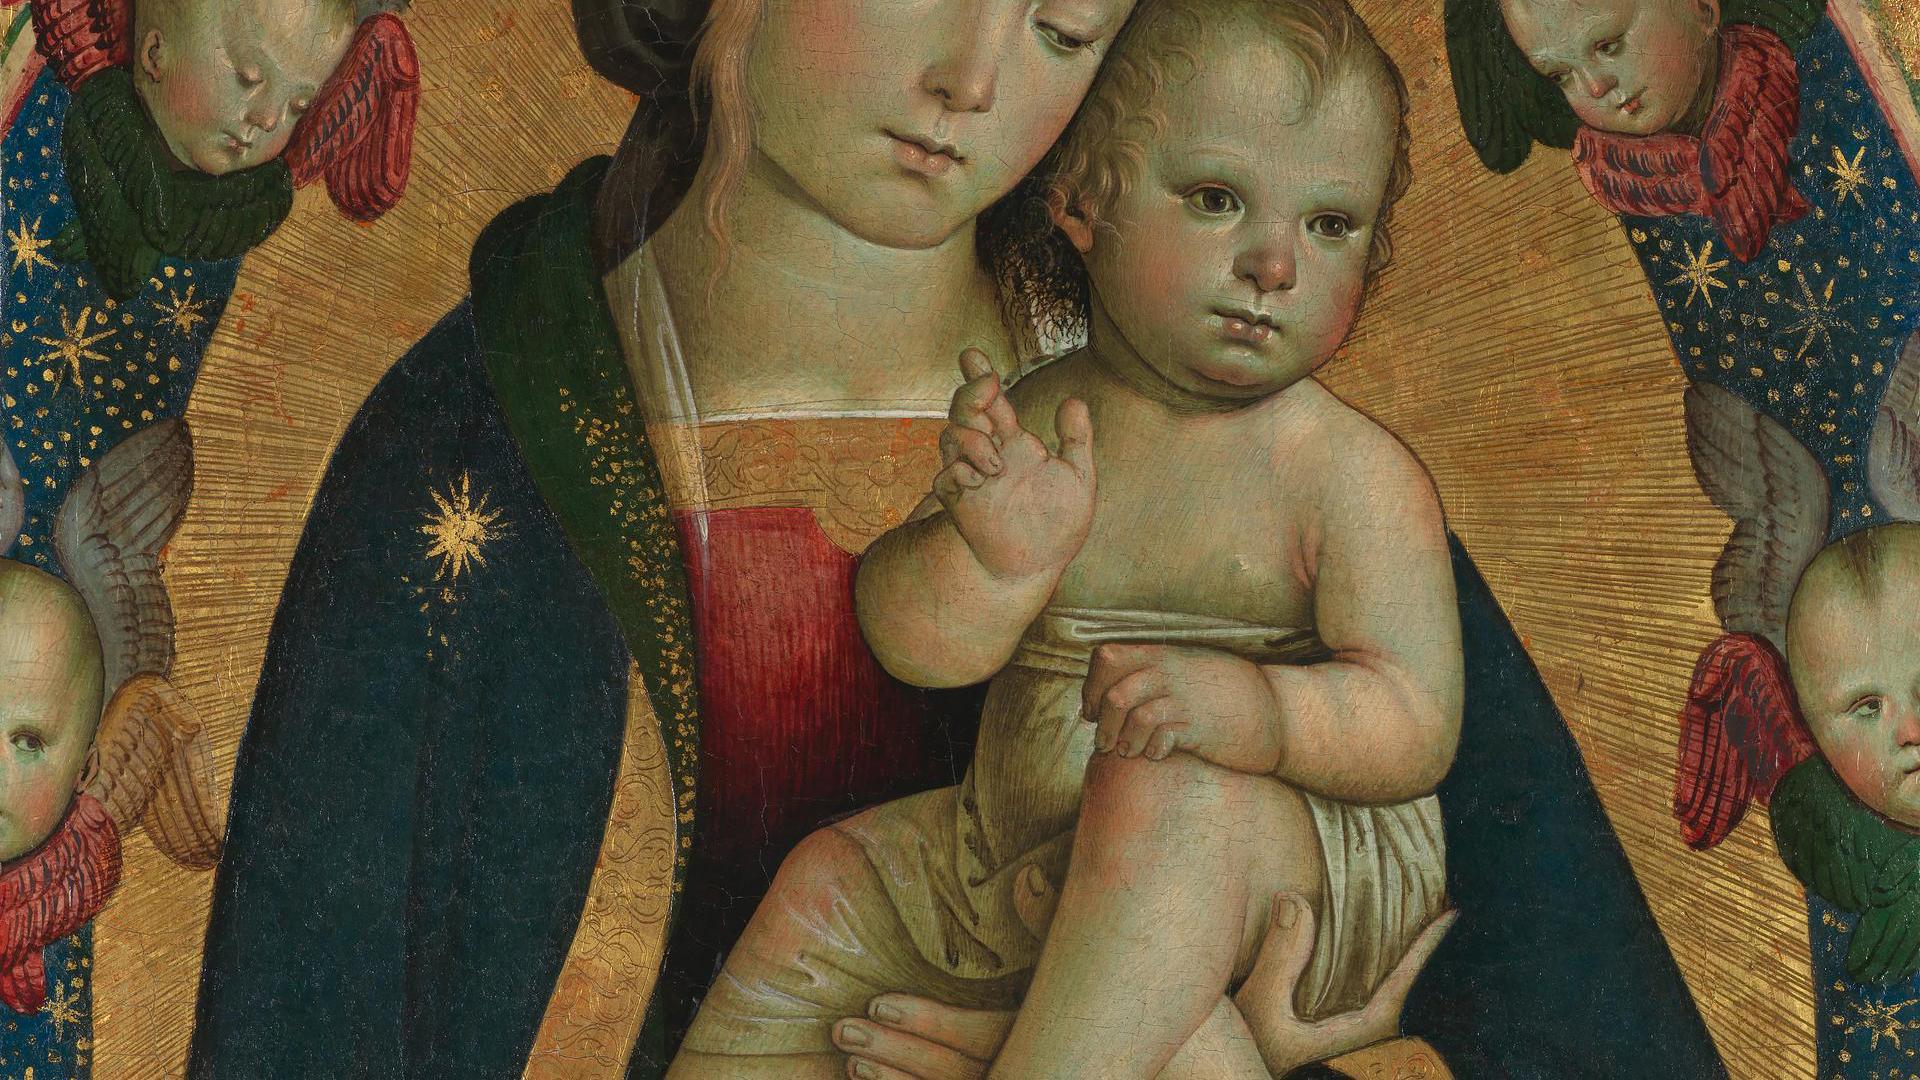 The Virgin and Child in a Mandorla with Cherubim by Italian, Umbrian or Roman